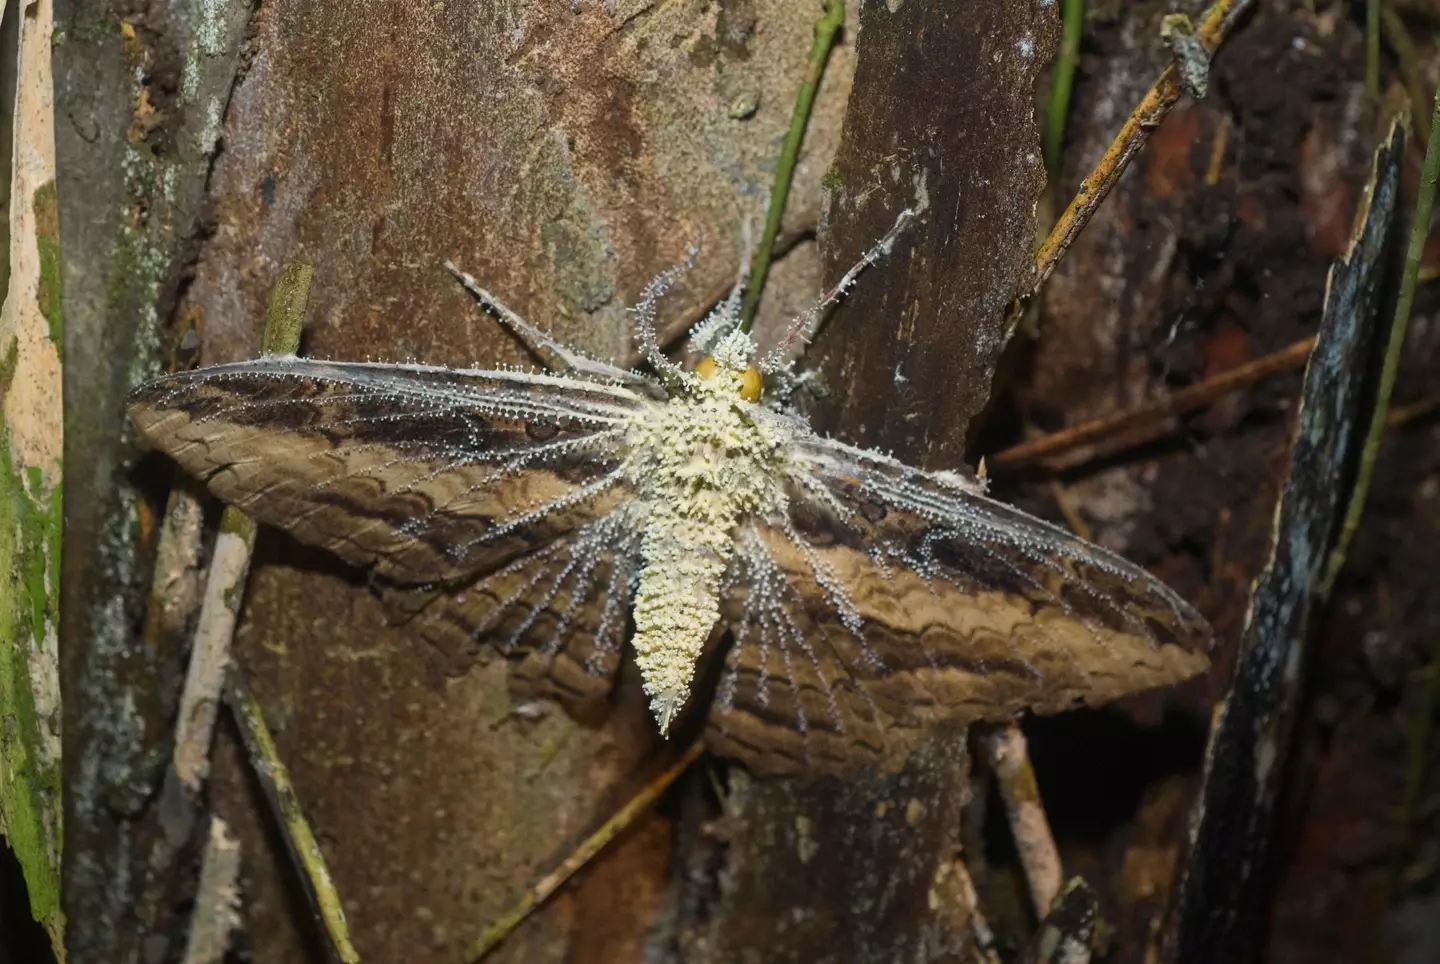 Insects are already under attack from the cordyceps fungus, are humans next?